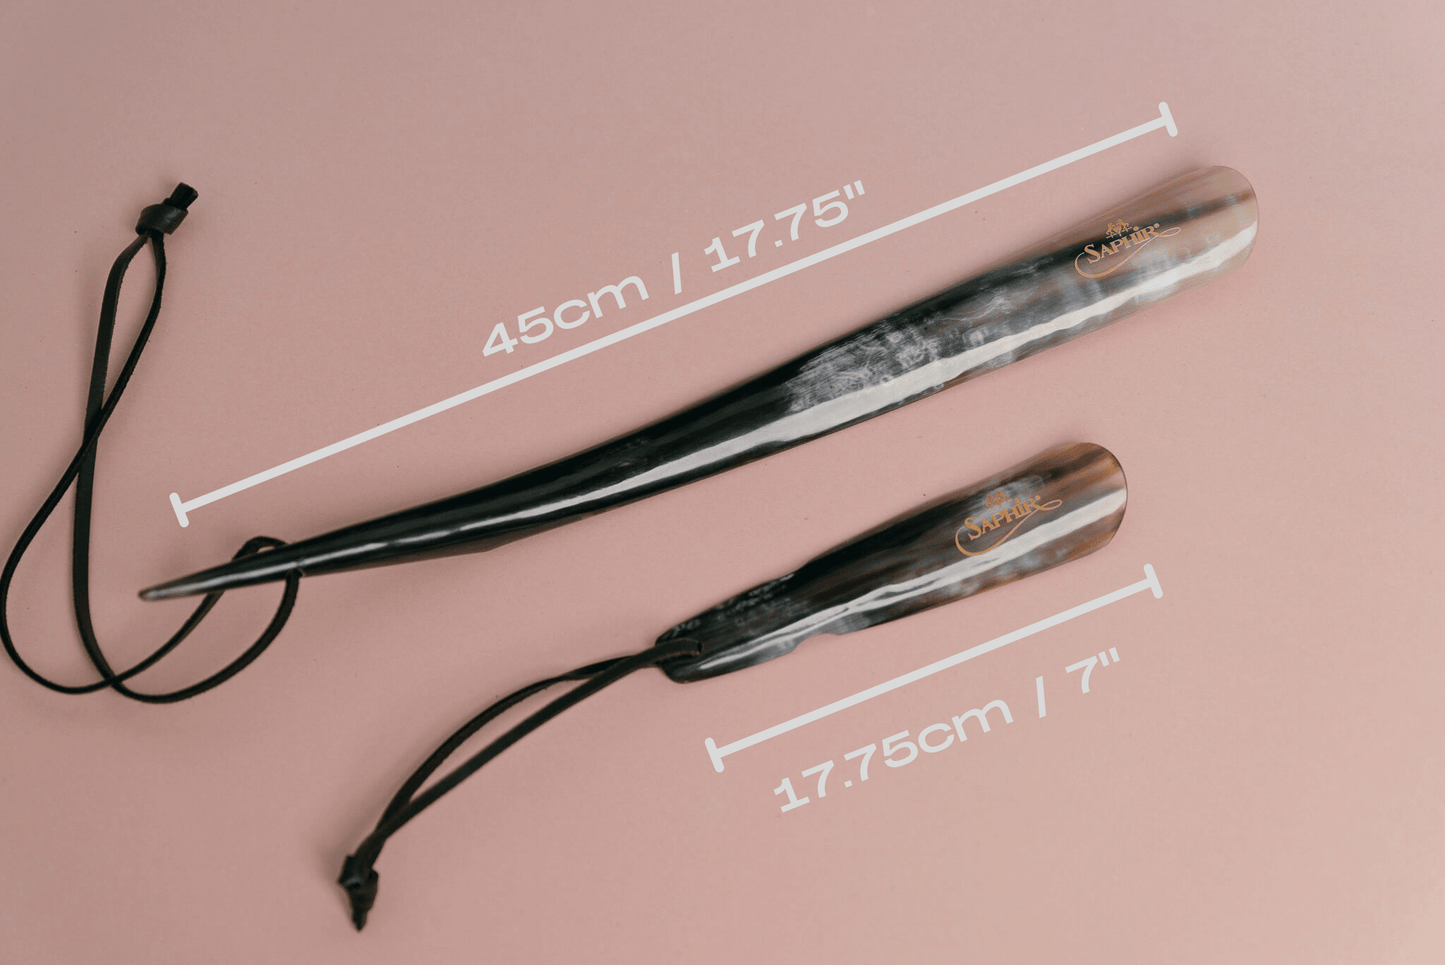 Saphir Medaille d'or buffalo horn shoe horn size comparison picture with numbers